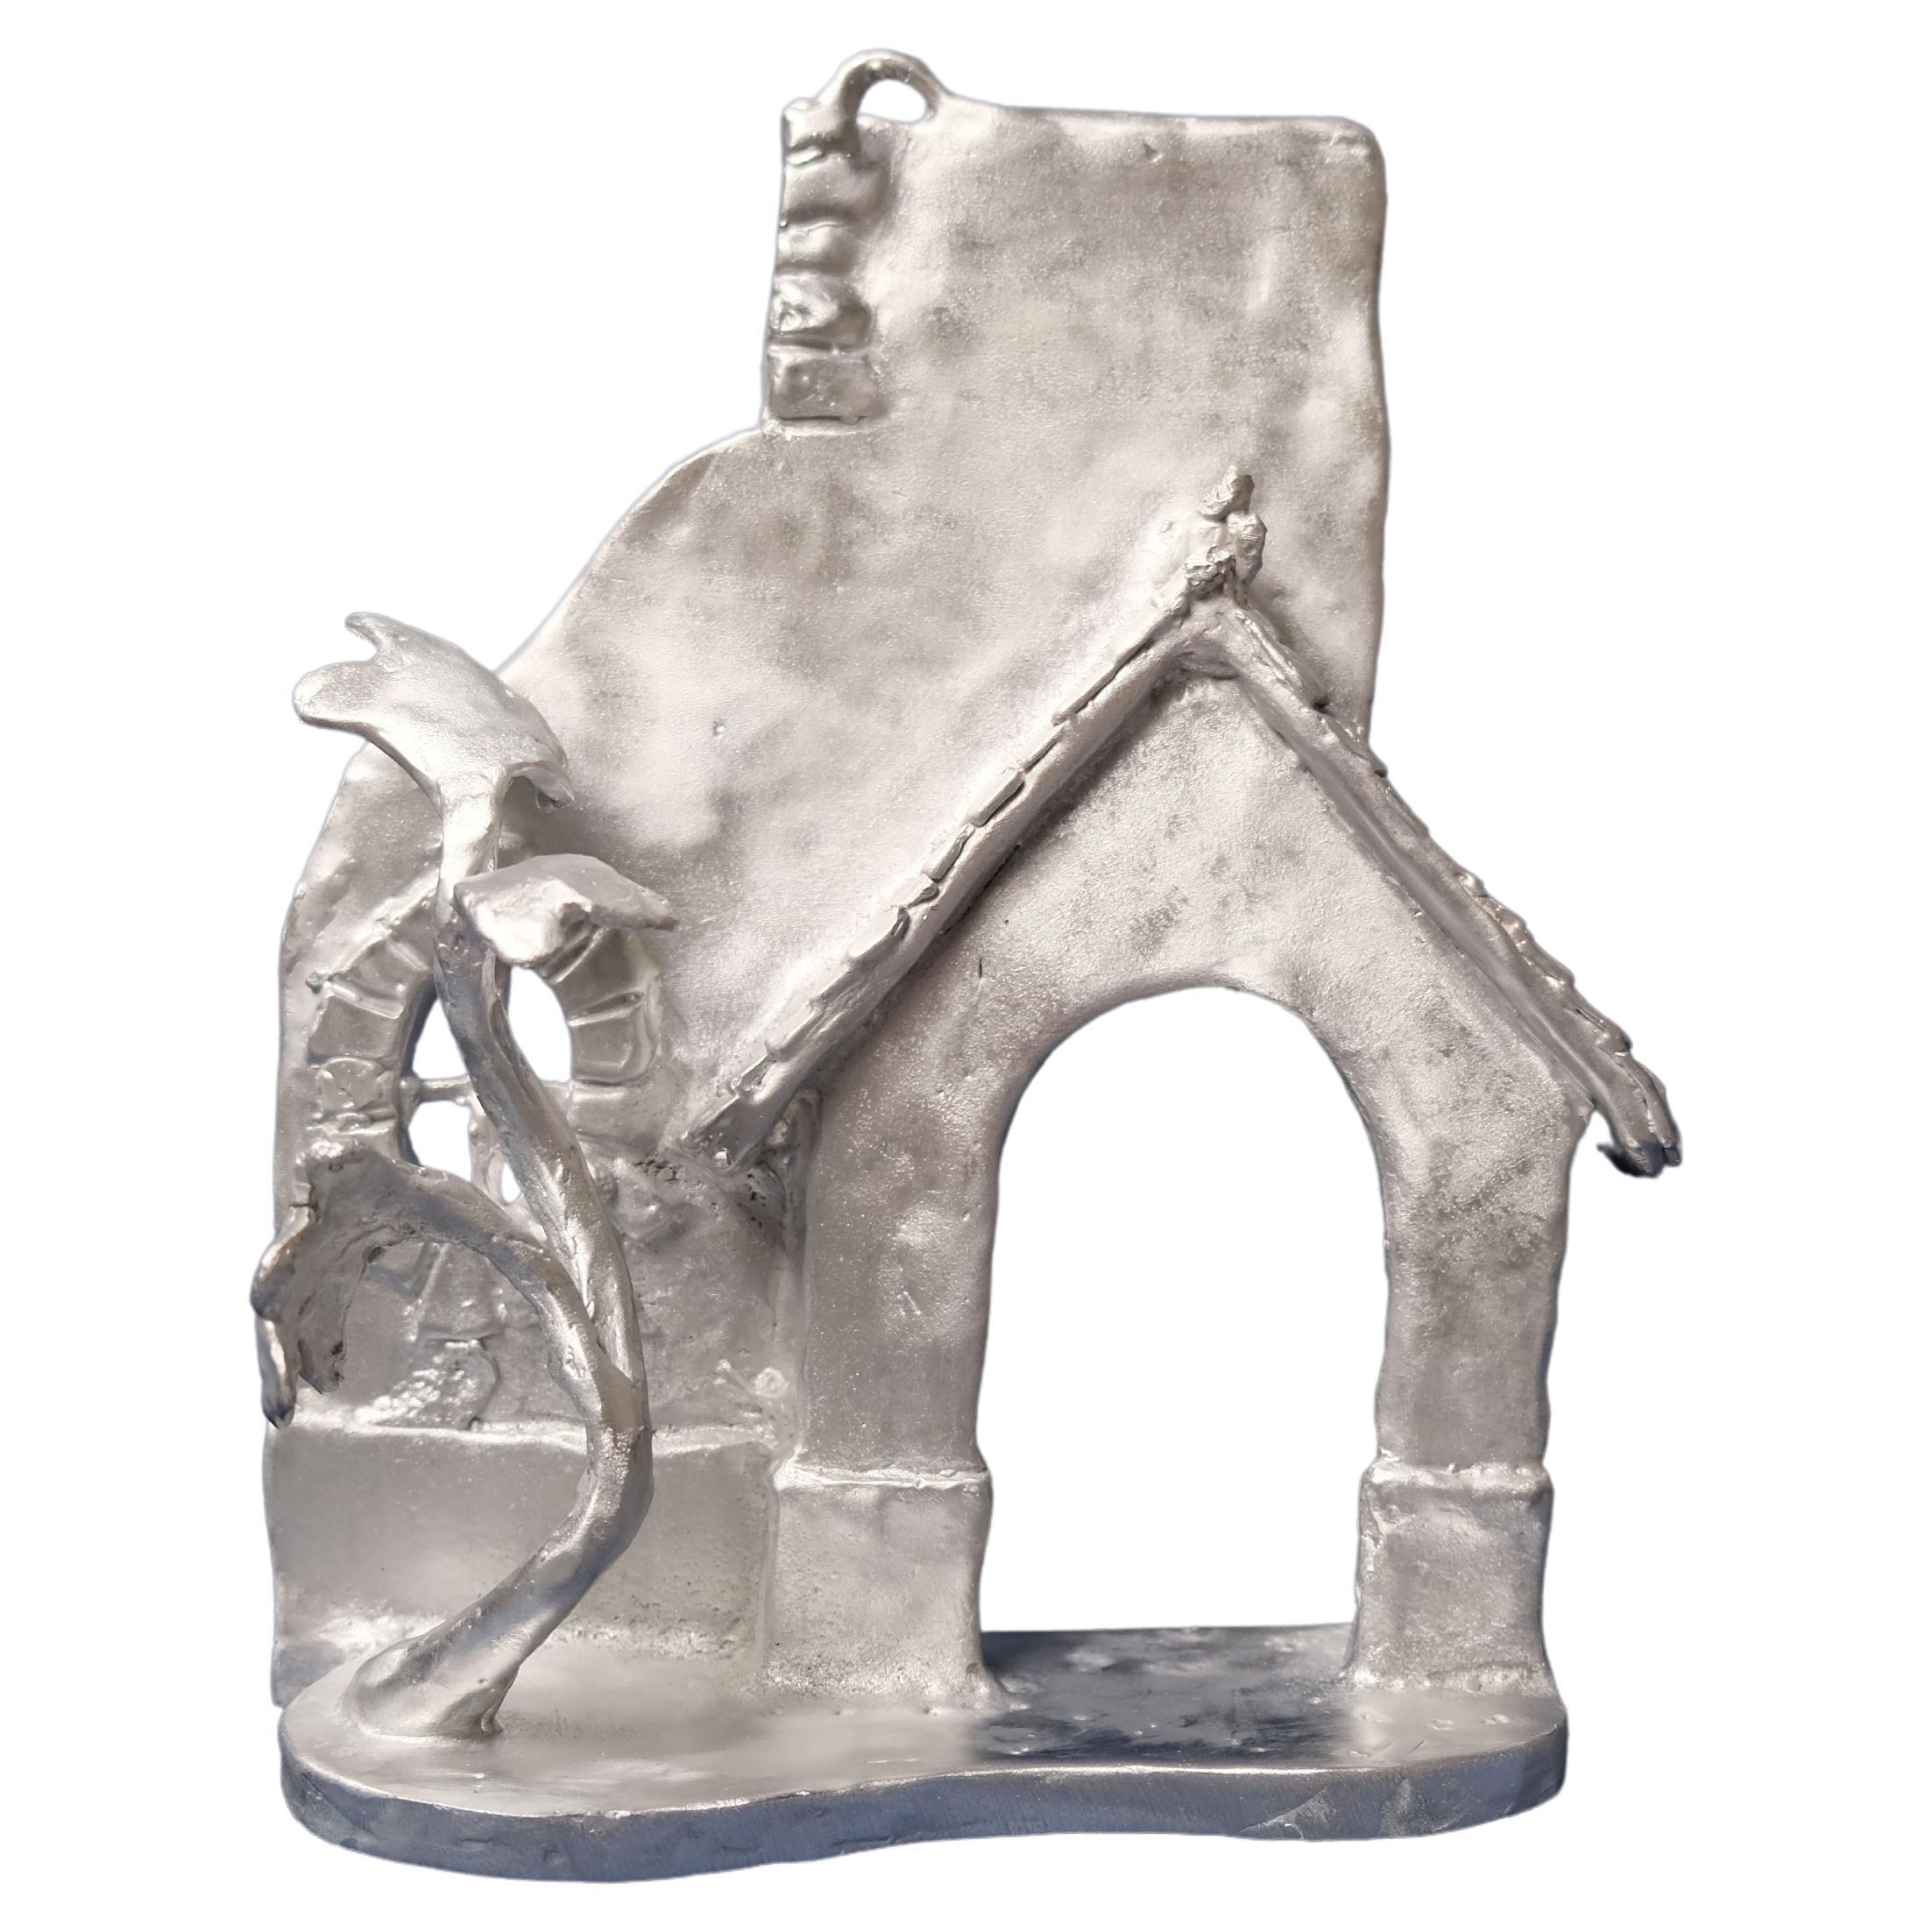 Handmade Aluminium cast wall sculpture depicting "The House Behind the Fence IV" For Sale